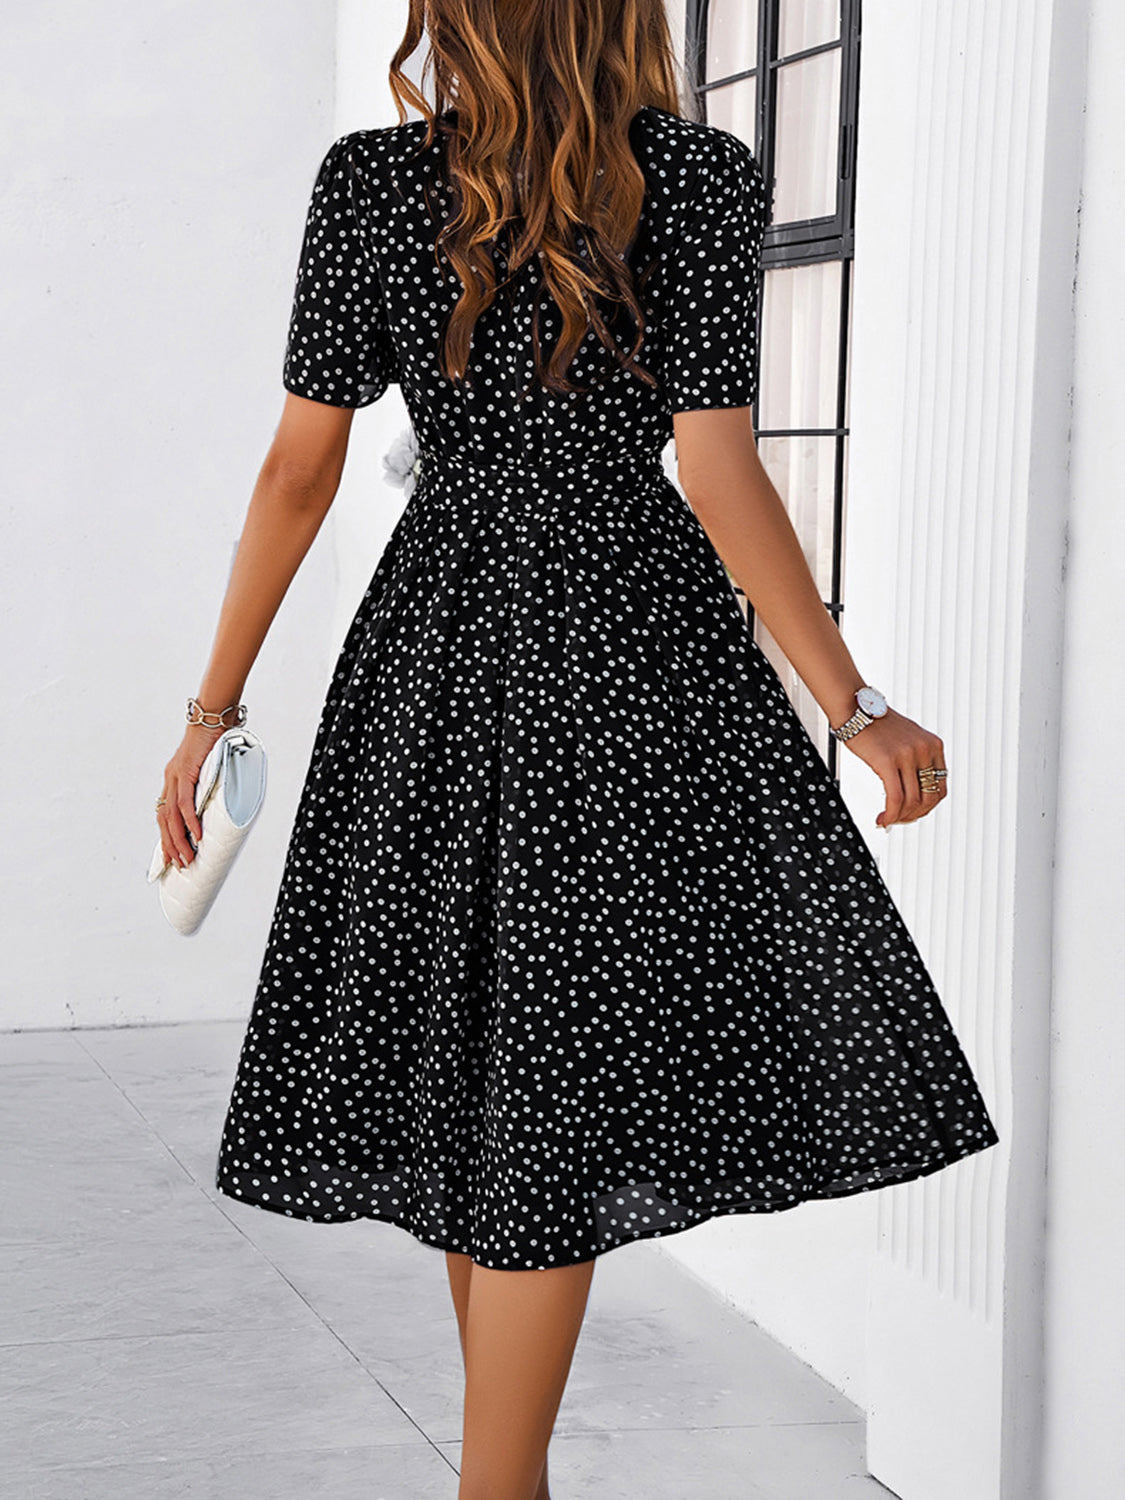 Chic polka dot dress perfect for any occasion. Available in multiple colors with a flattering fit and easy-care fabric